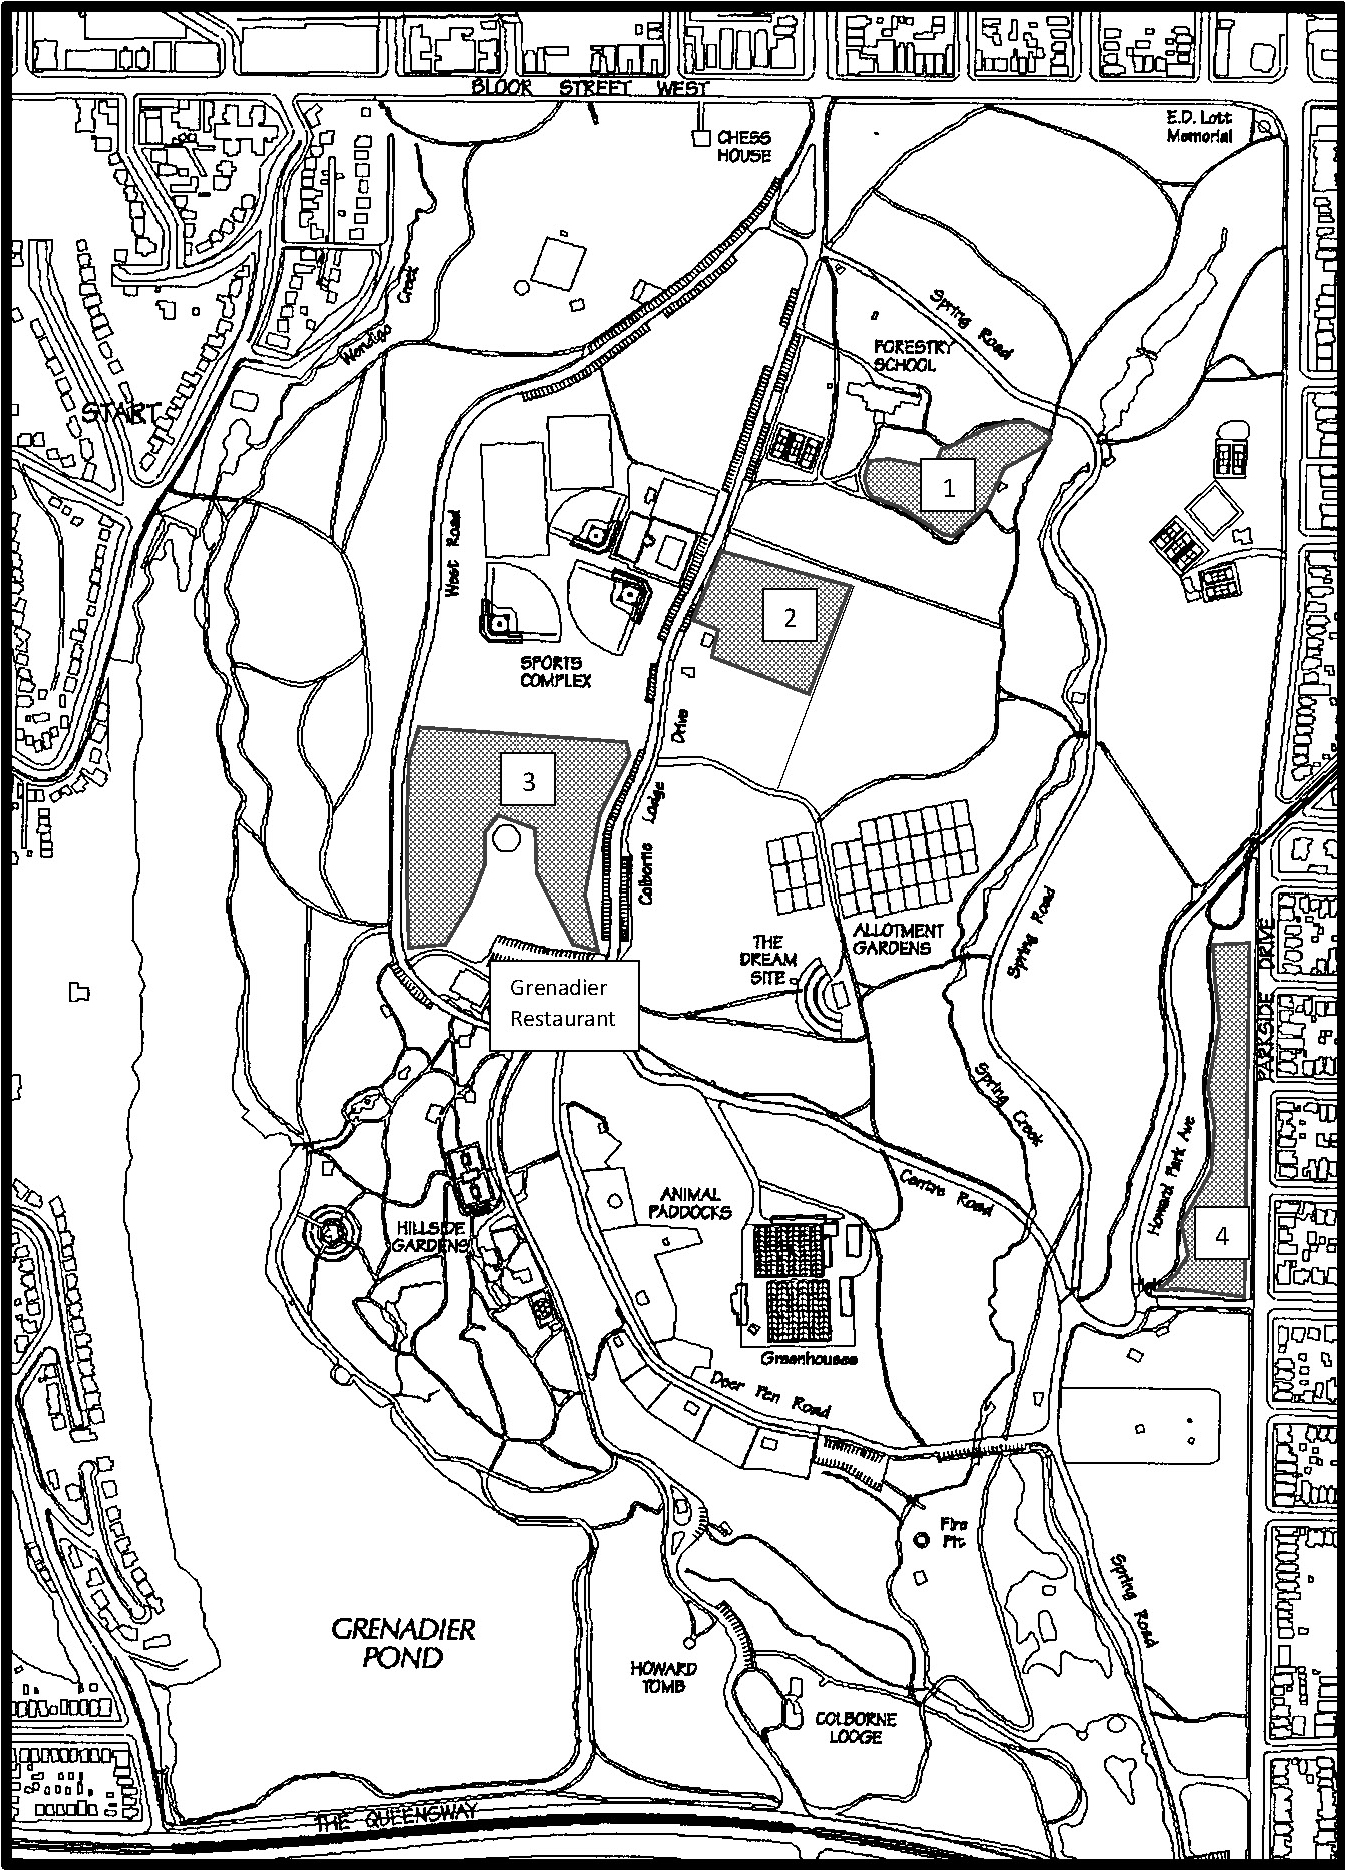 Map of High Park showing four prescribed burn sites for 2022: two sites located south of the Forestry School; one site located south of the Sports Complex just north of Grenadier Restaurant; and one site on the east side of the park, south of the Parkside Drive park entrance between Howard Park Avenue and Parkside Drive.